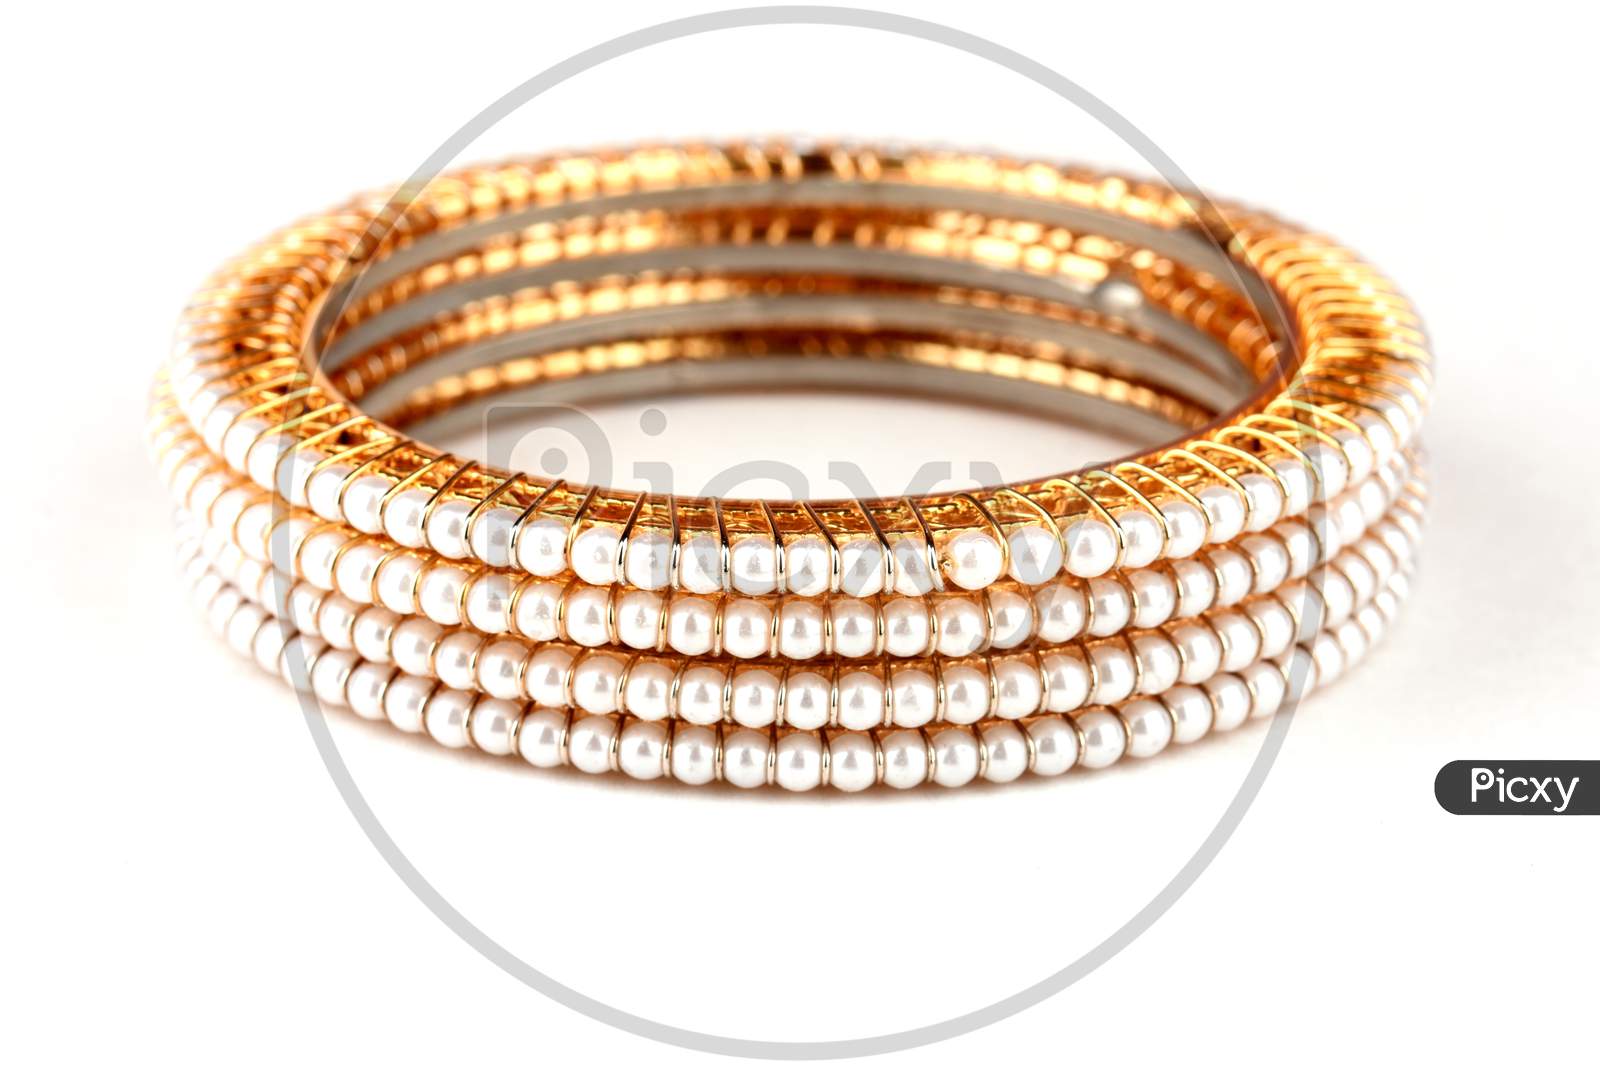 Pearl Bracelet Bangle, Indian  Pearl (Moti) Bangles,  Indian Traditional Jewellery